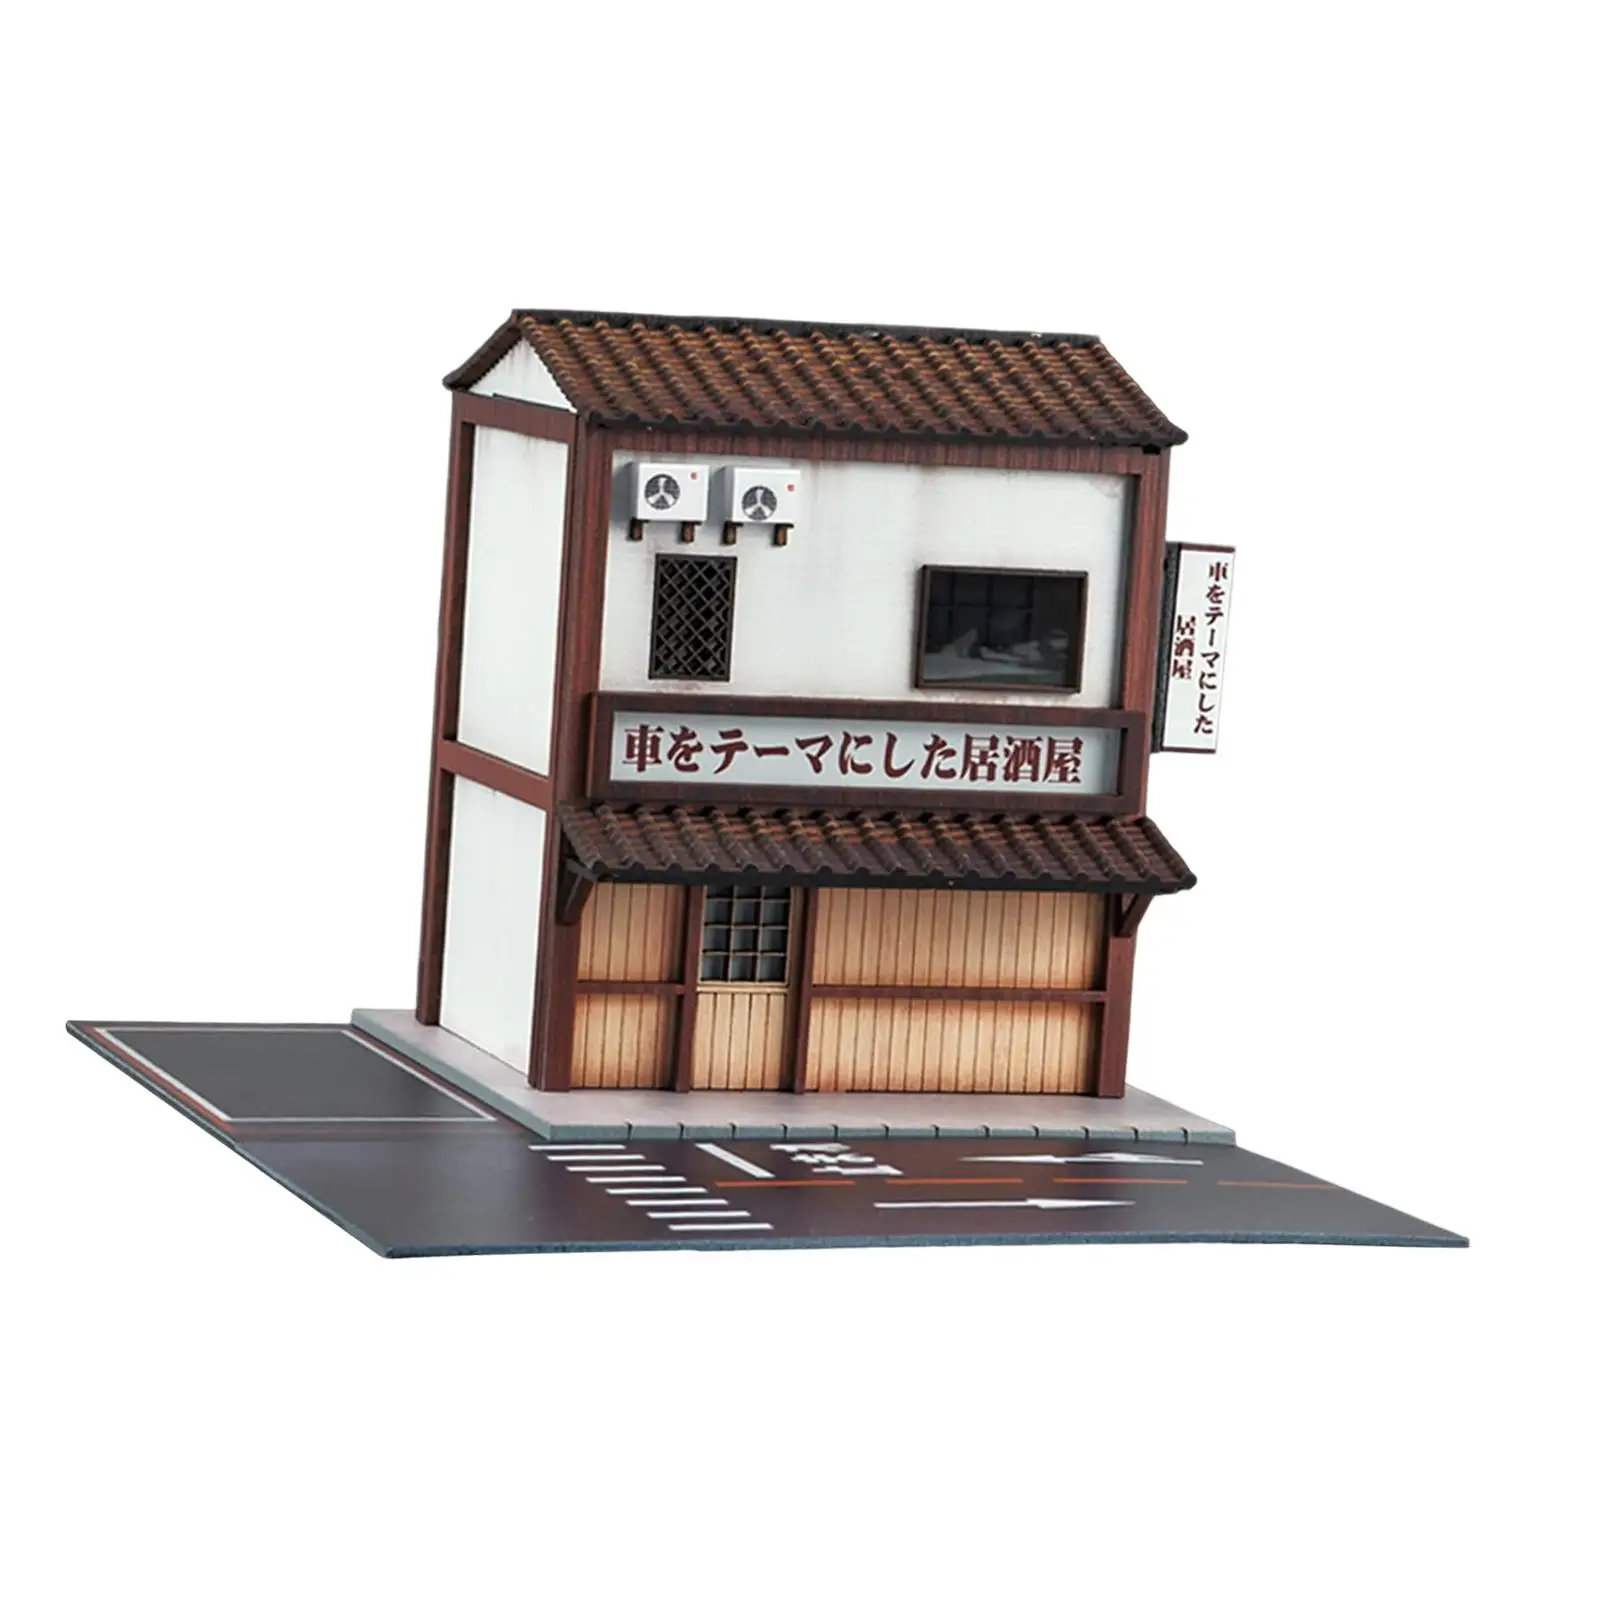 1/64 Car Garage Diorama Model with Lights Collection Models Scenery for Scenery City DIY Model Micro Landscape Sand Table